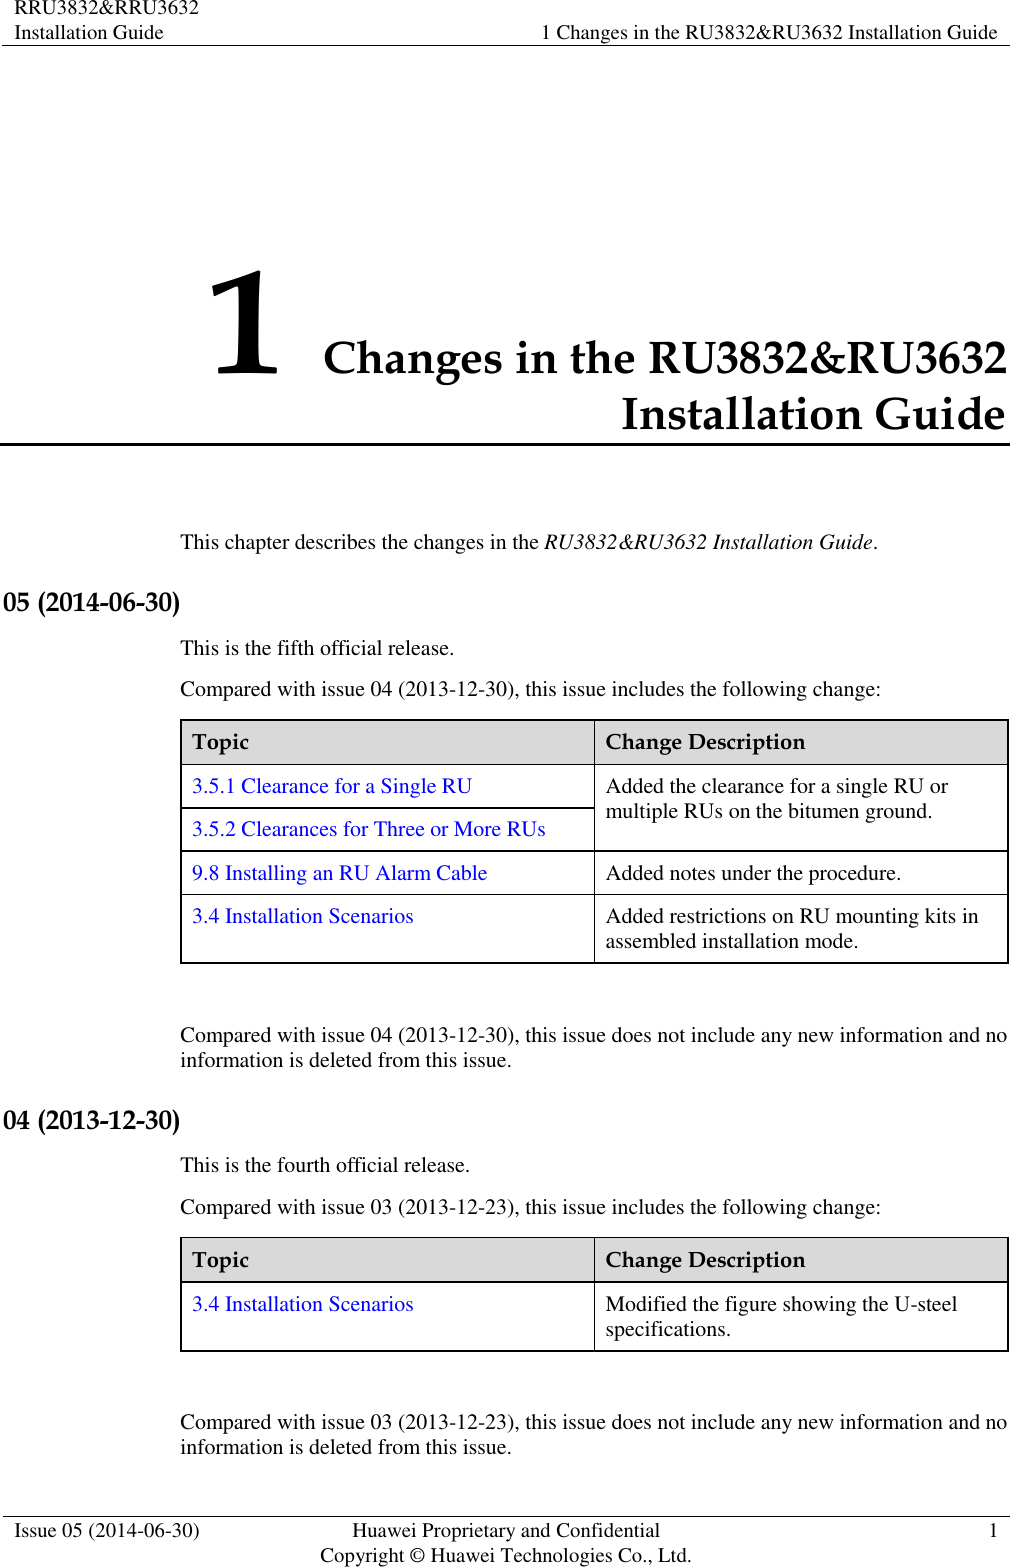 RRU3832&amp;RRU3632 Installation Guide 1 Changes in the RU3832&amp;RU3632 Installation Guide  Issue 05 (2014-06-30) Huawei Proprietary and Confidential                                     Copyright © Huawei Technologies Co., Ltd. 1  1 Changes in the RU3832&amp;RU3632 Installation Guide This chapter describes the changes in the RU3832&amp;RU3632 Installation Guide. 05 (2014-06-30) This is the fifth official release. Compared with issue 04 (2013-12-30), this issue includes the following change: Topic Change Description 3.5.1 Clearance for a Single RU Added the clearance for a single RU or multiple RUs on the bitumen ground. 3.5.2 Clearances for Three or More RUs 9.8 Installing an RU Alarm Cable Added notes under the procedure. 3.4 Installation Scenarios Added restrictions on RU mounting kits in assembled installation mode.  Compared with issue 04 (2013-12-30), this issue does not include any new information and no information is deleted from this issue. 04 (2013-12-30) This is the fourth official release. Compared with issue 03 (2013-12-23), this issue includes the following change: Topic Change Description 3.4 Installation Scenarios Modified the figure showing the U-steel specifications.  Compared with issue 03 (2013-12-23), this issue does not include any new information and no information is deleted from this issue. 